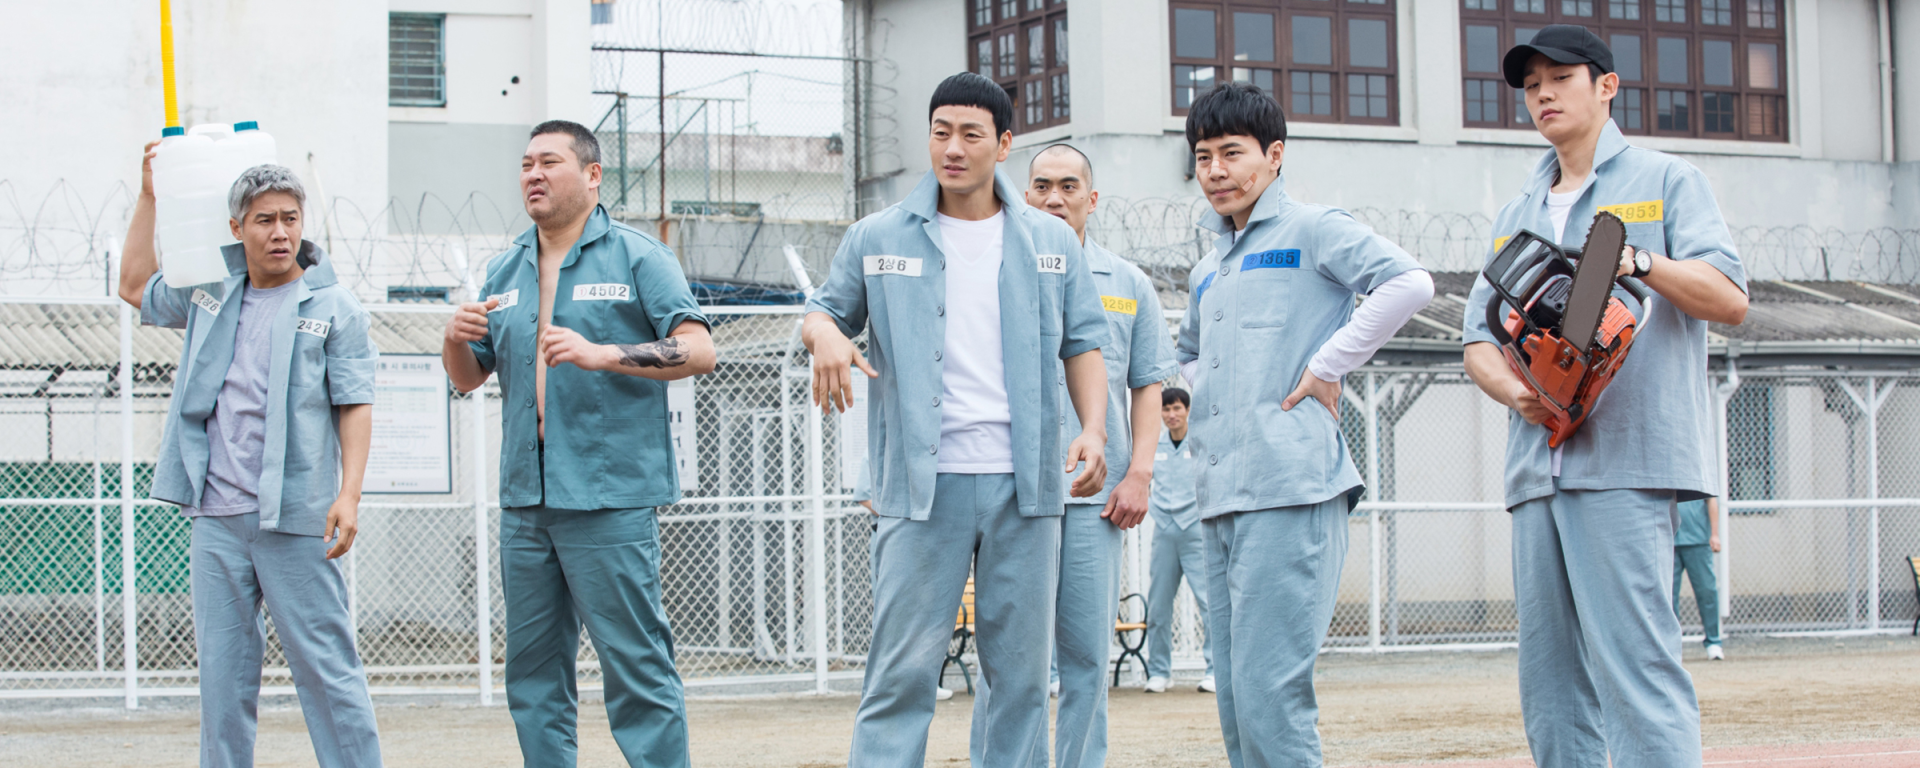 Prison Playbook - Full Review